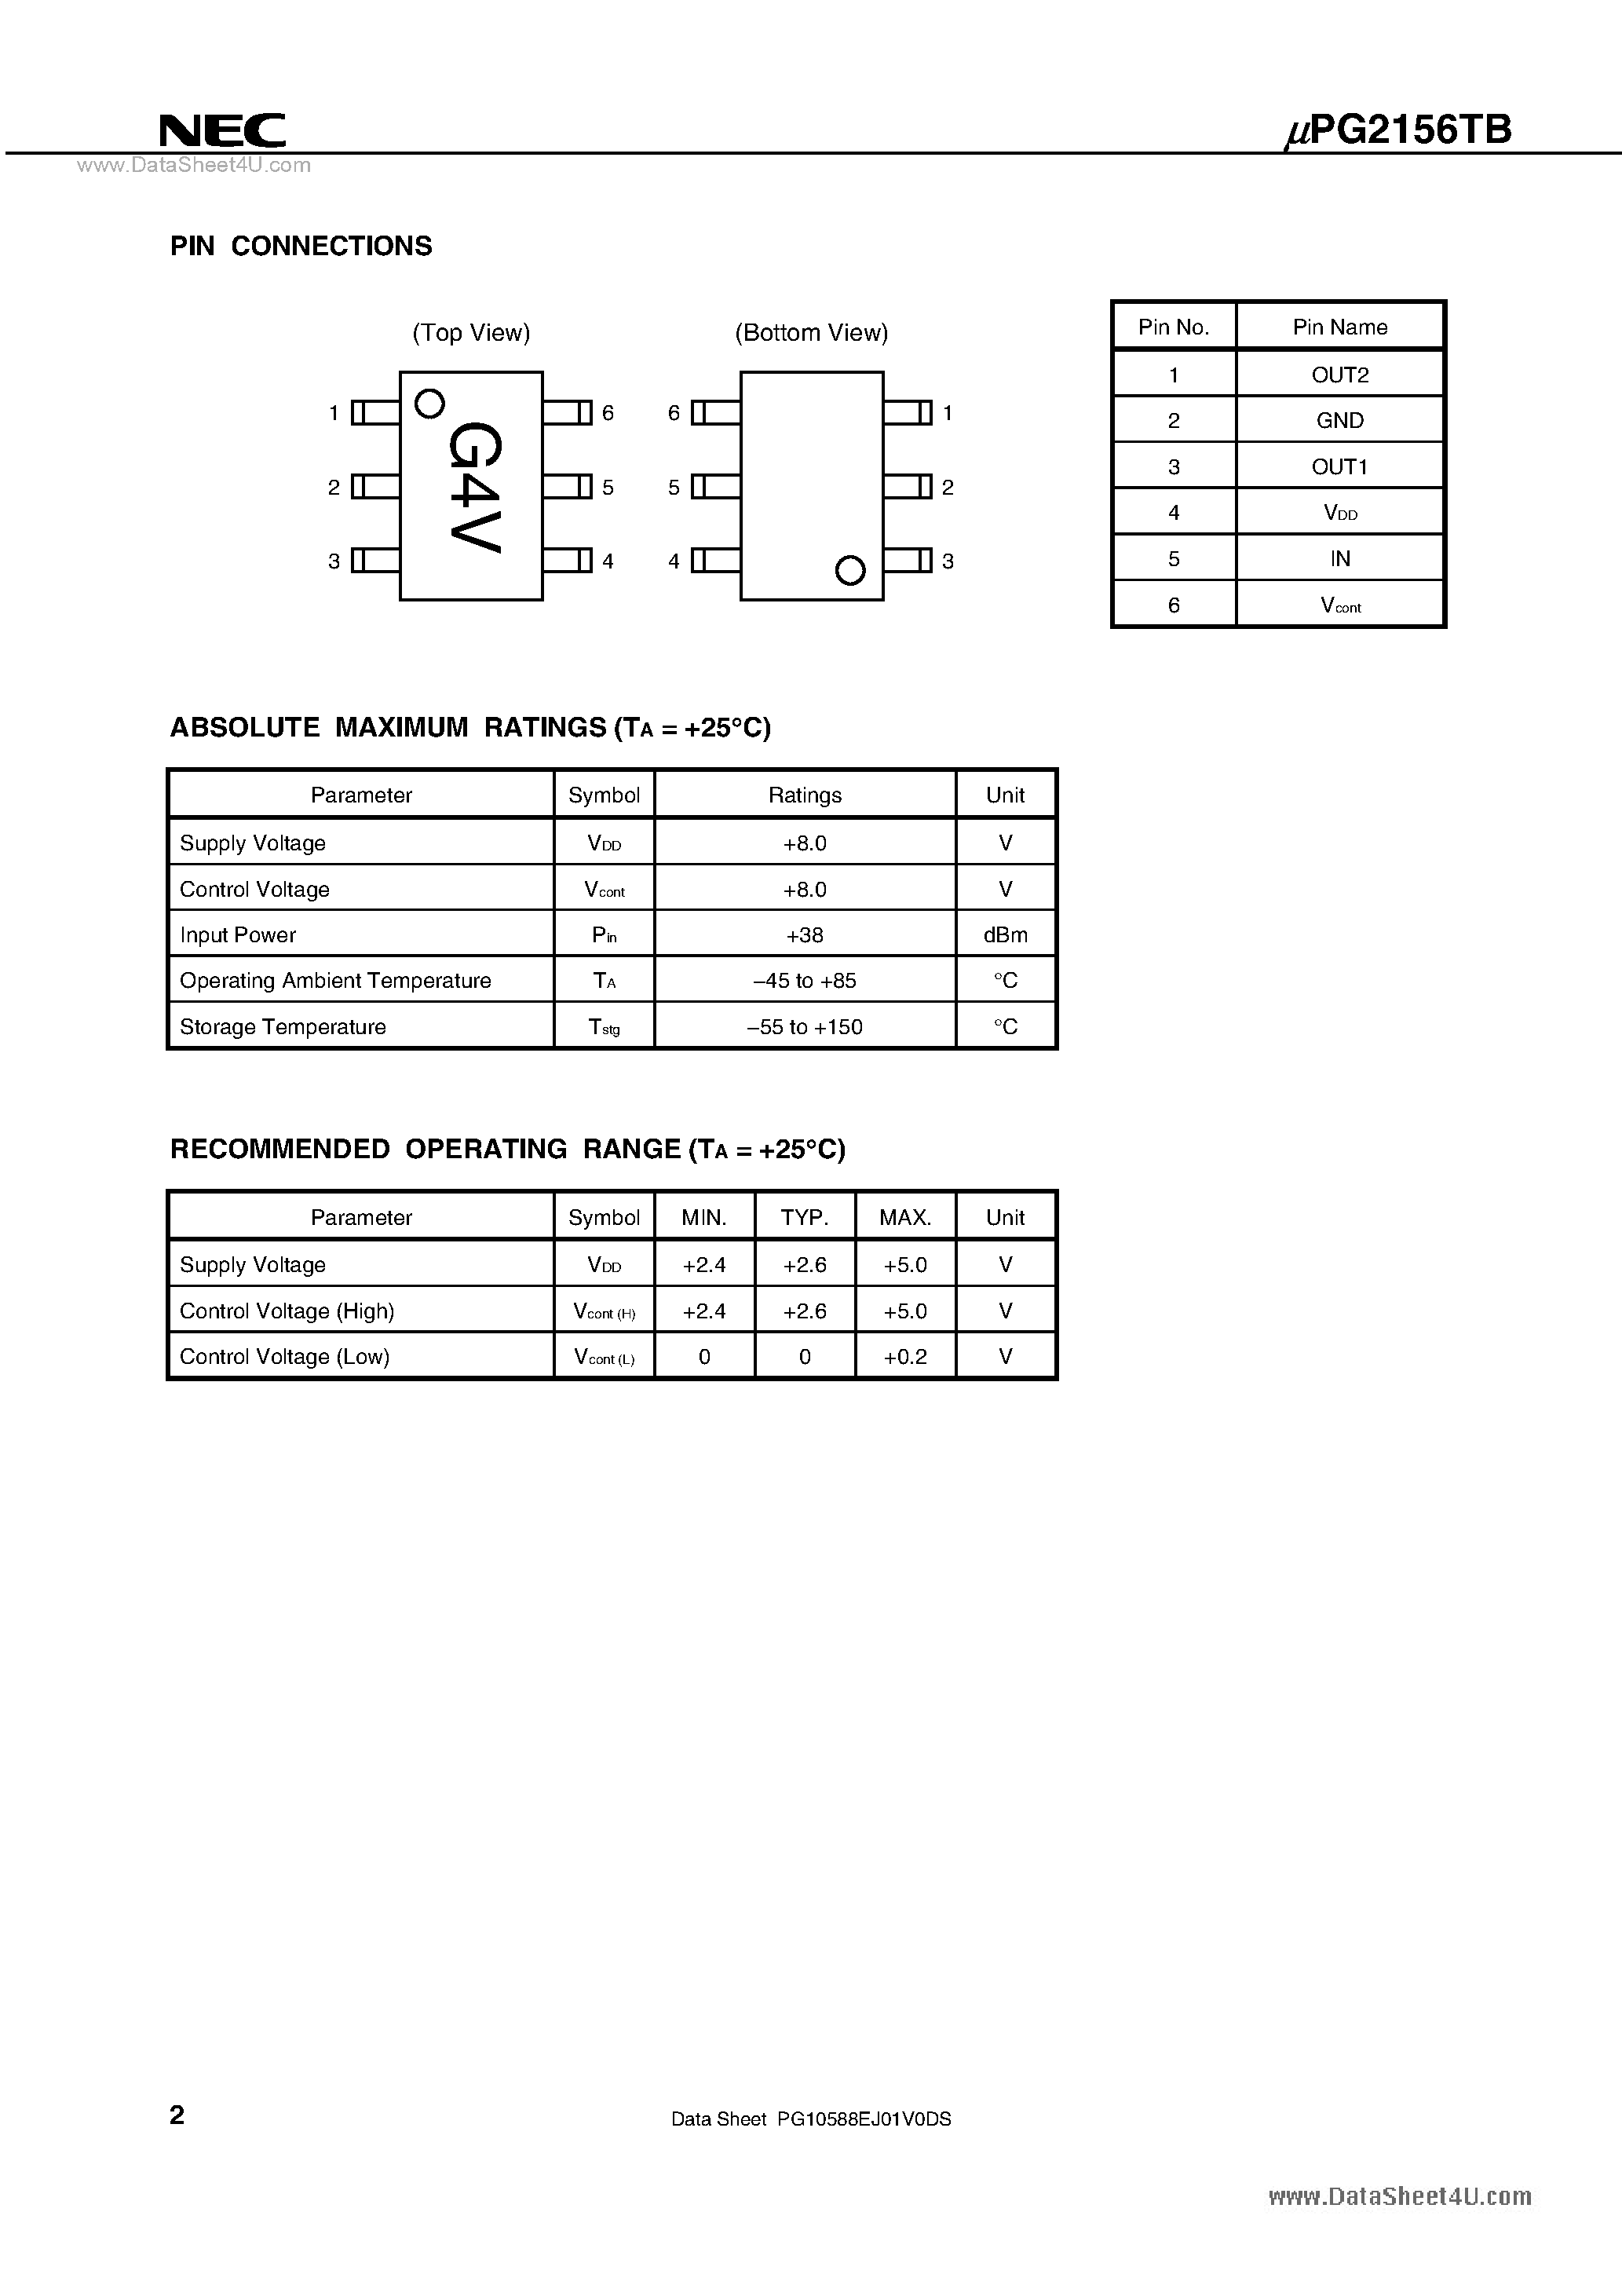 Datasheet UPG2156TB - L-BAND 4 W SINGLE CONTROL HIGH POWER SPDT SWITCH page 2